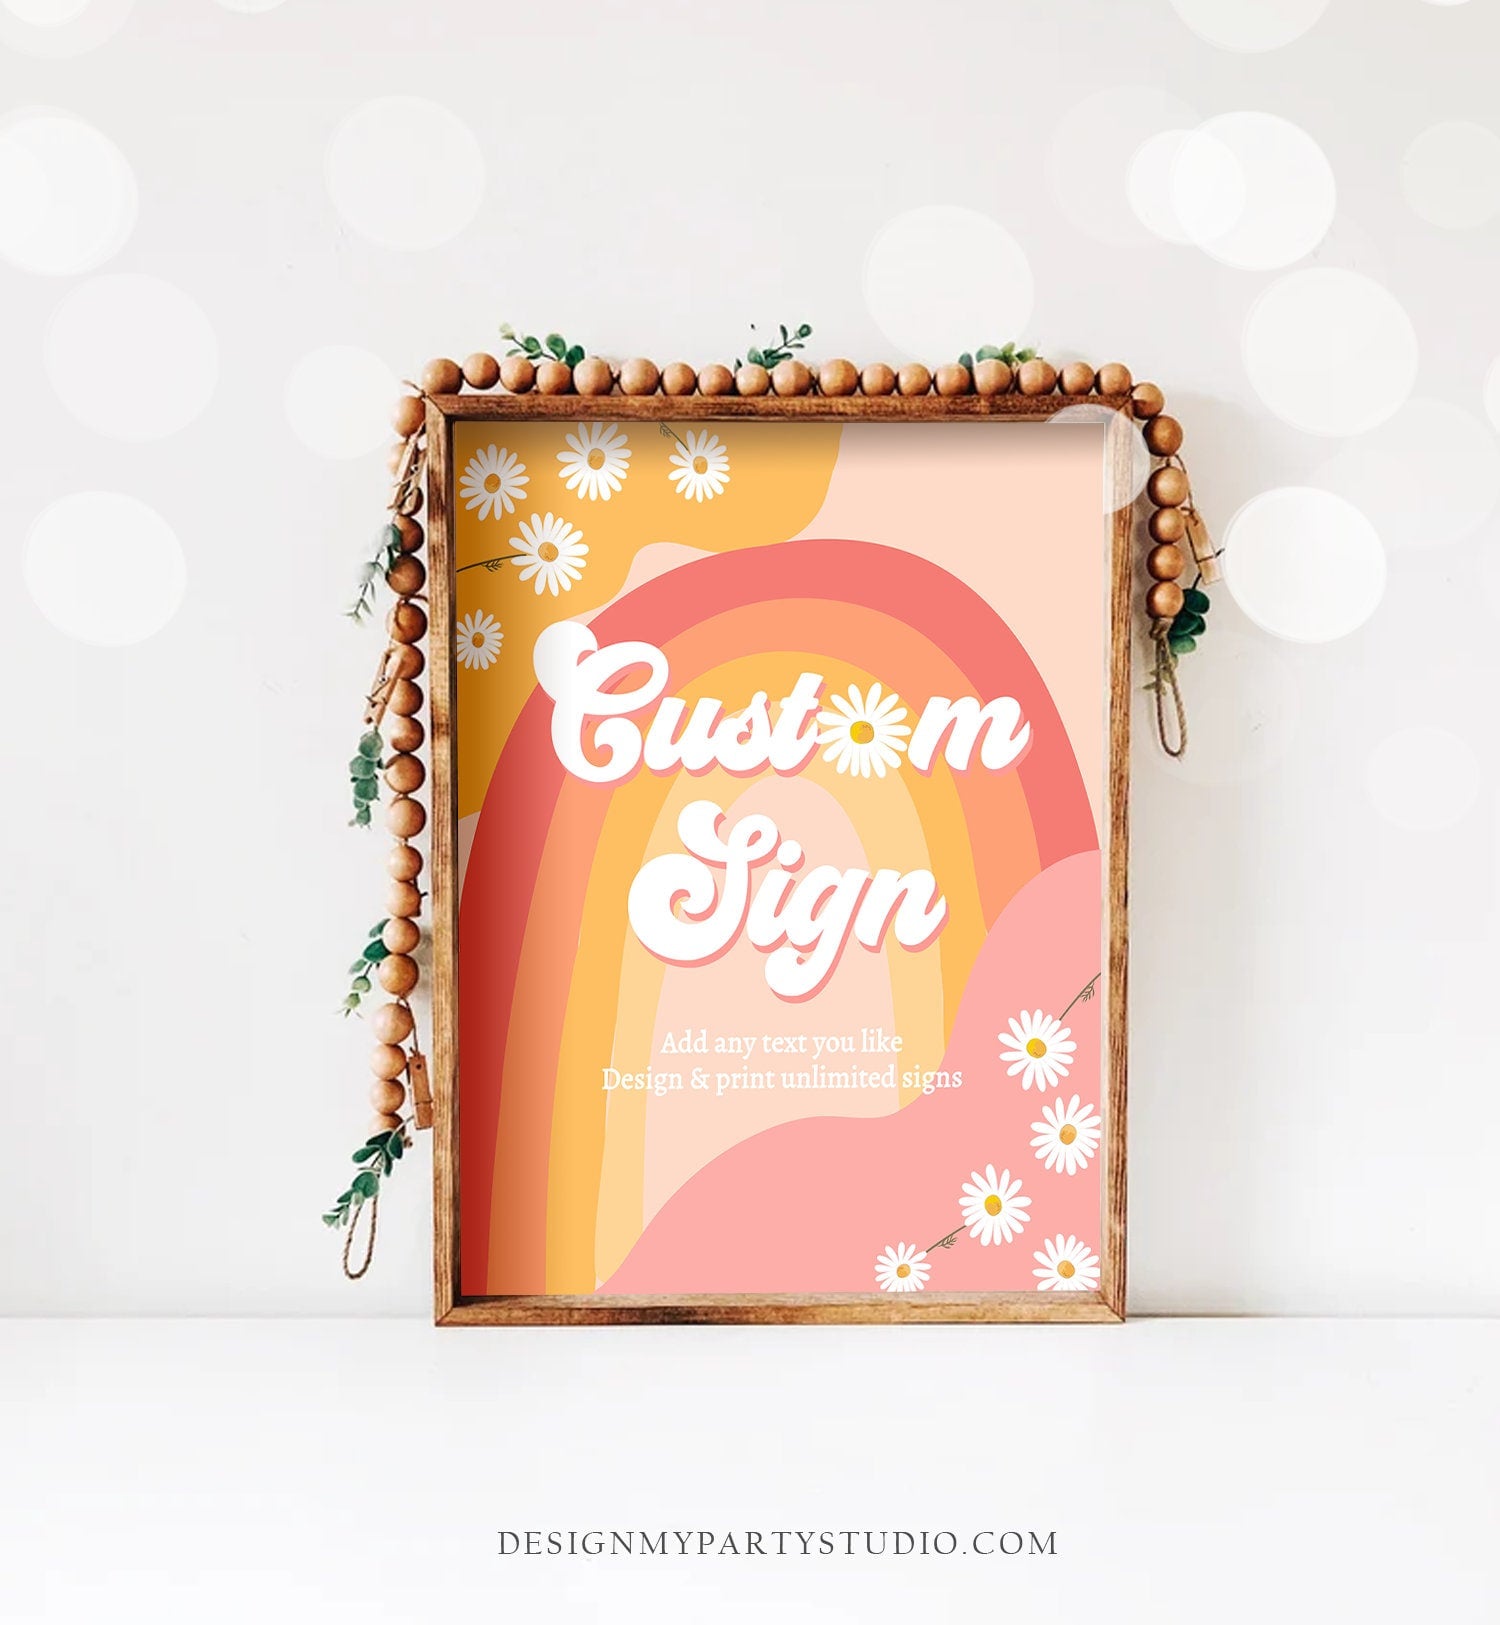 Editable Custom Sign Retro Groovy Birthday Party Groovy Pink Baby Shower Decor Daisy Floral Hippie 70s 8x10 Download PRINTABLE Corjl 0428